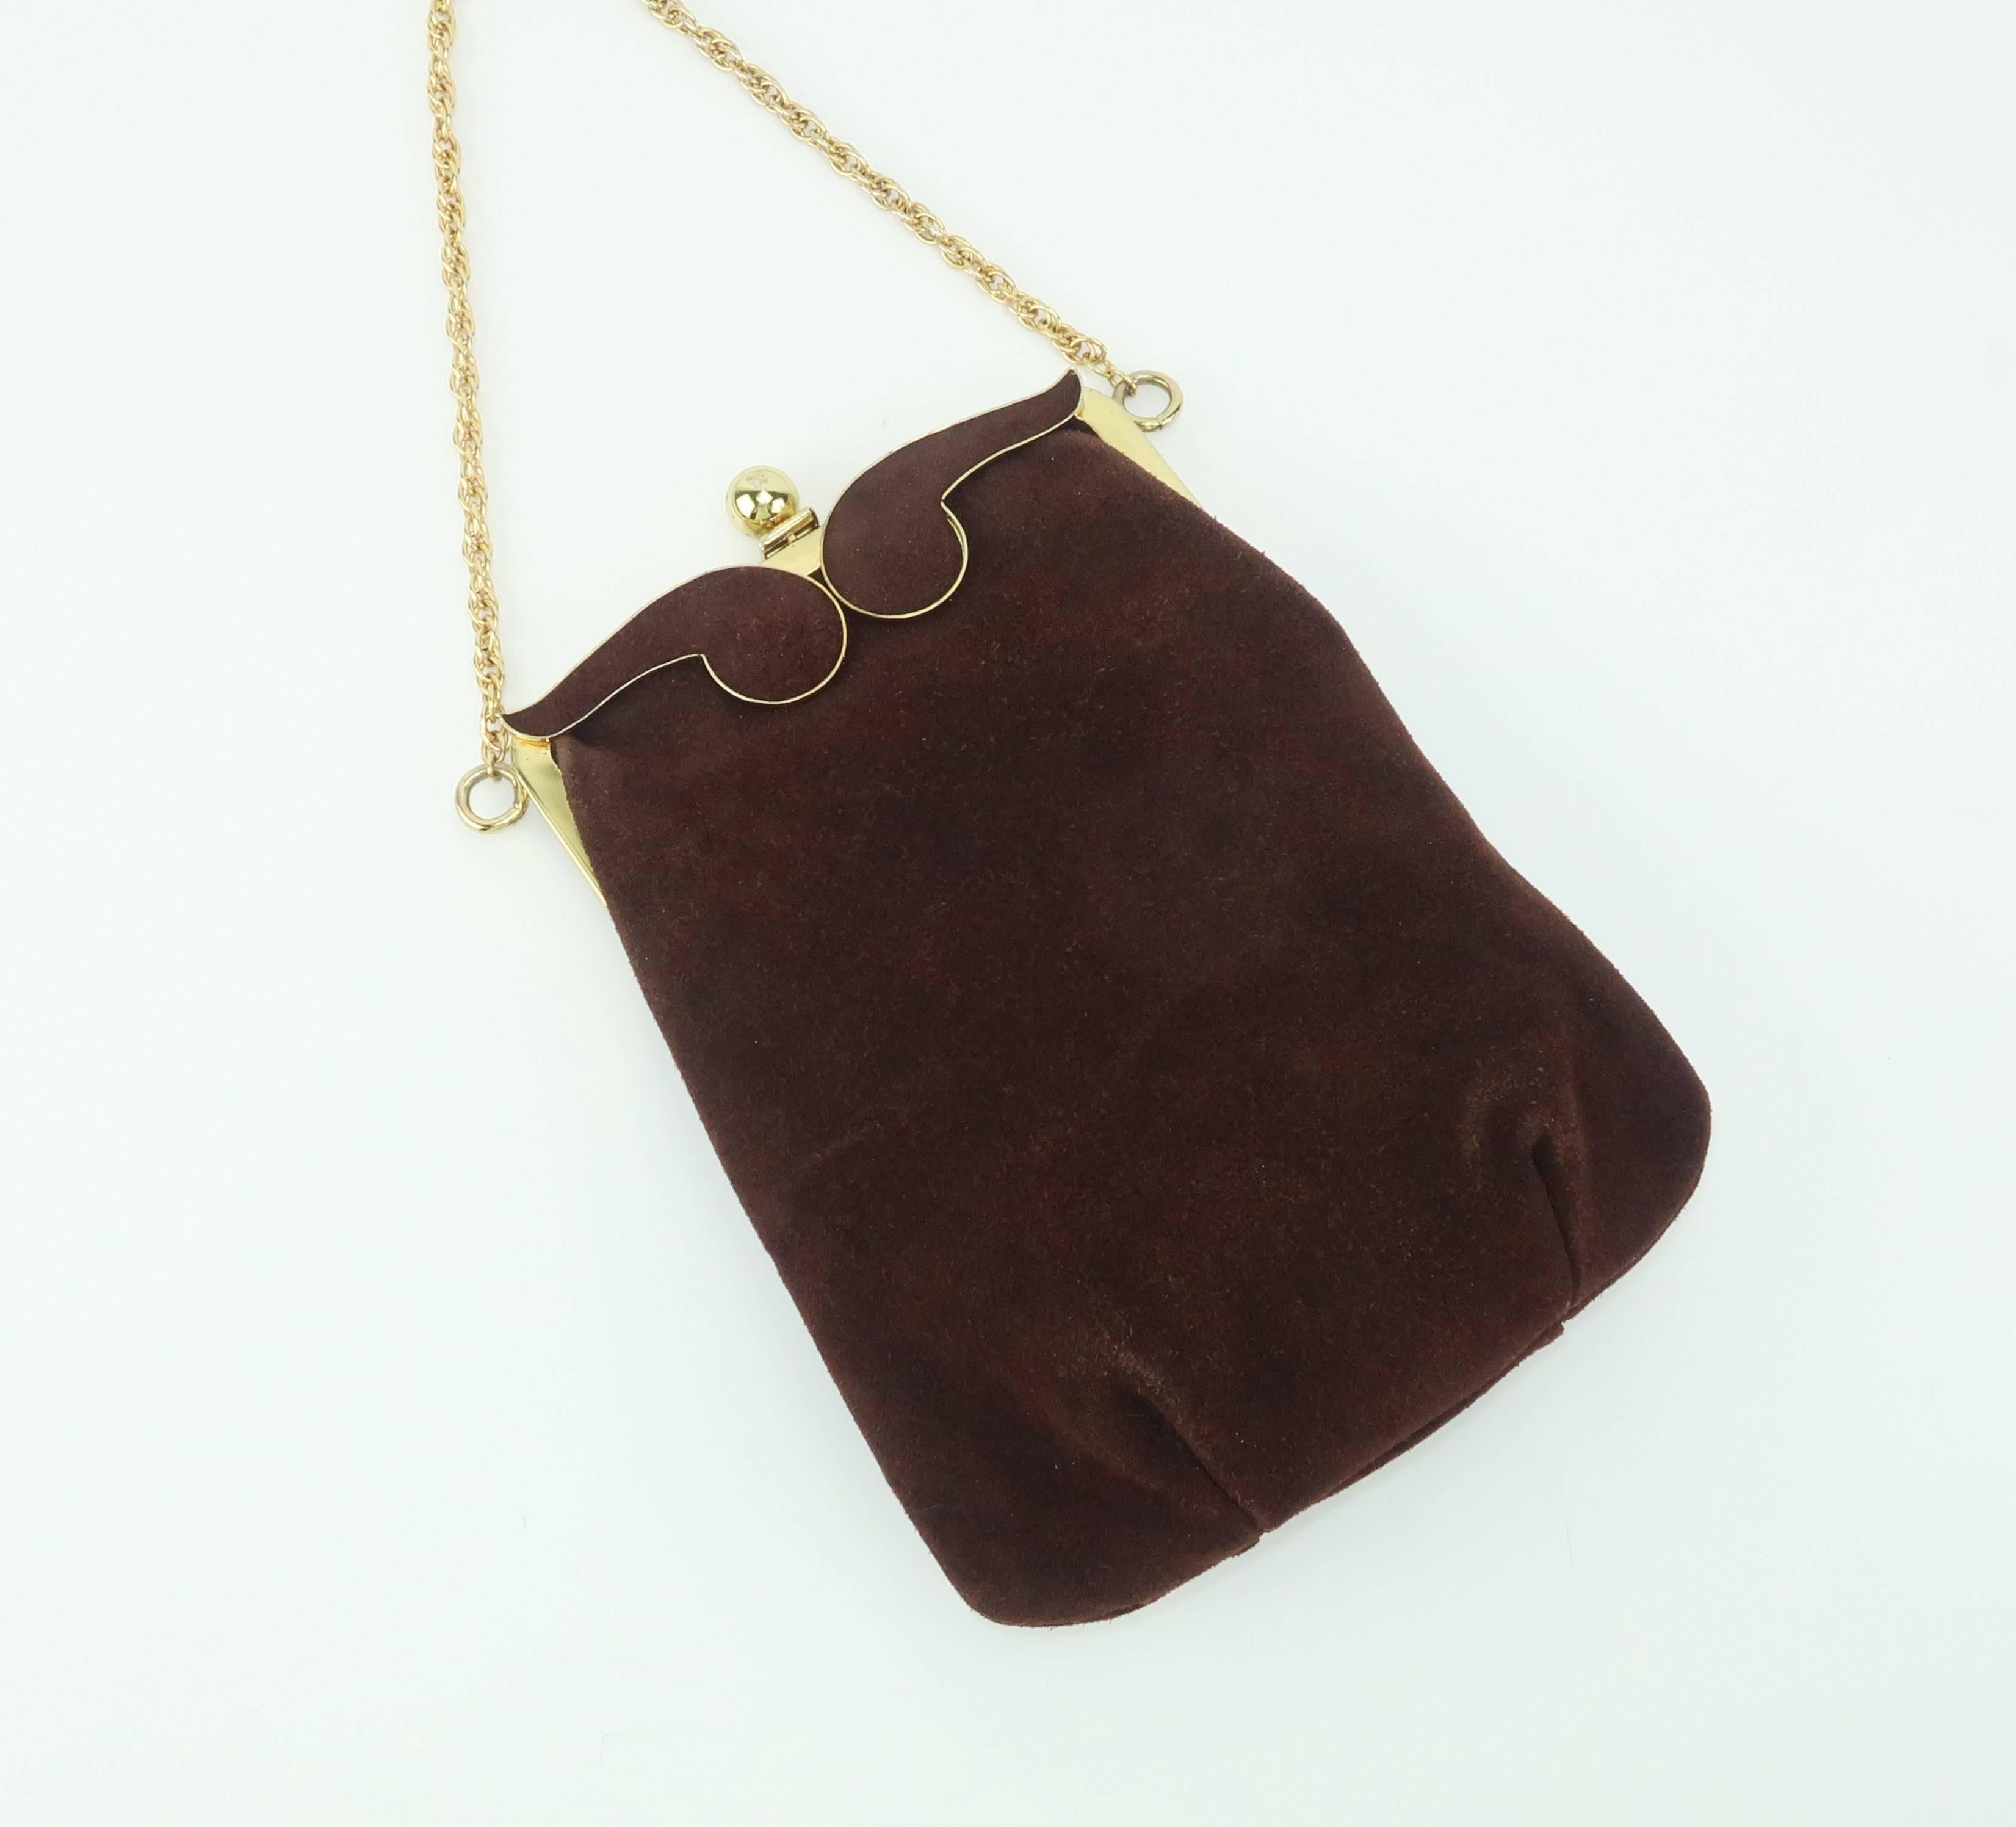 1960's Brown Suede Leather Handbag With Gold Chain Shoulder Handle 1